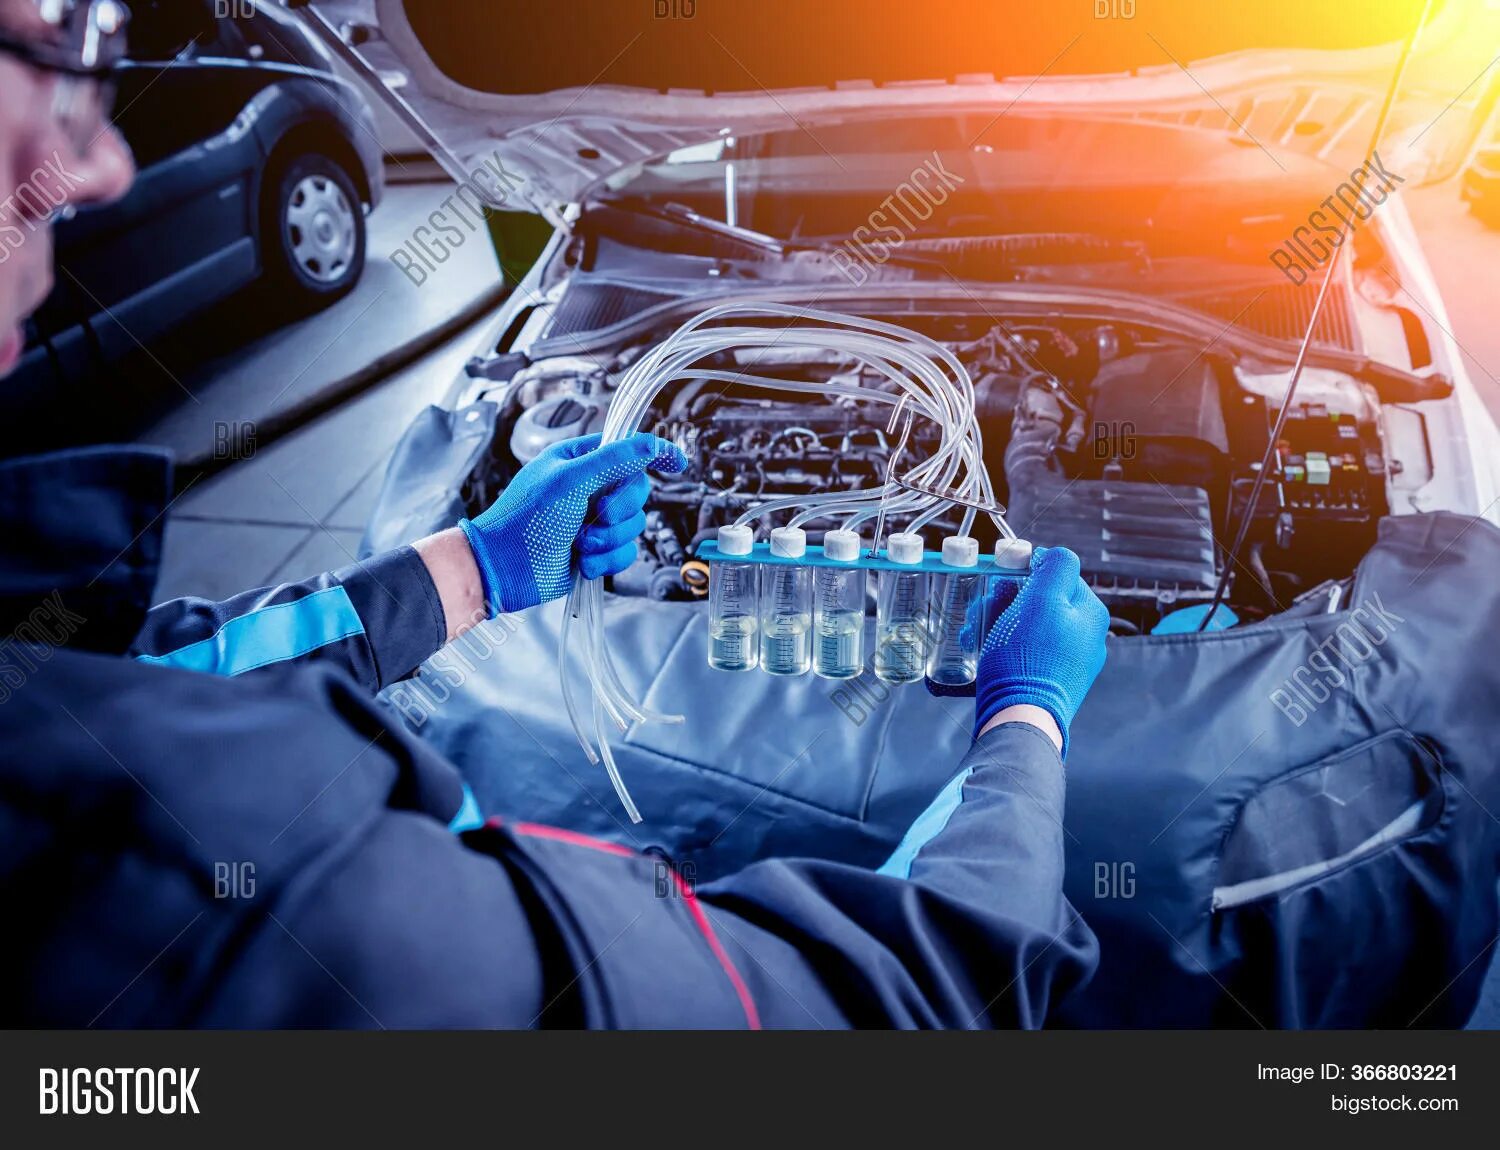 Clean injectors. Kz650 fuel Repair. Injection in car. Clean engine. Advertising car injector.